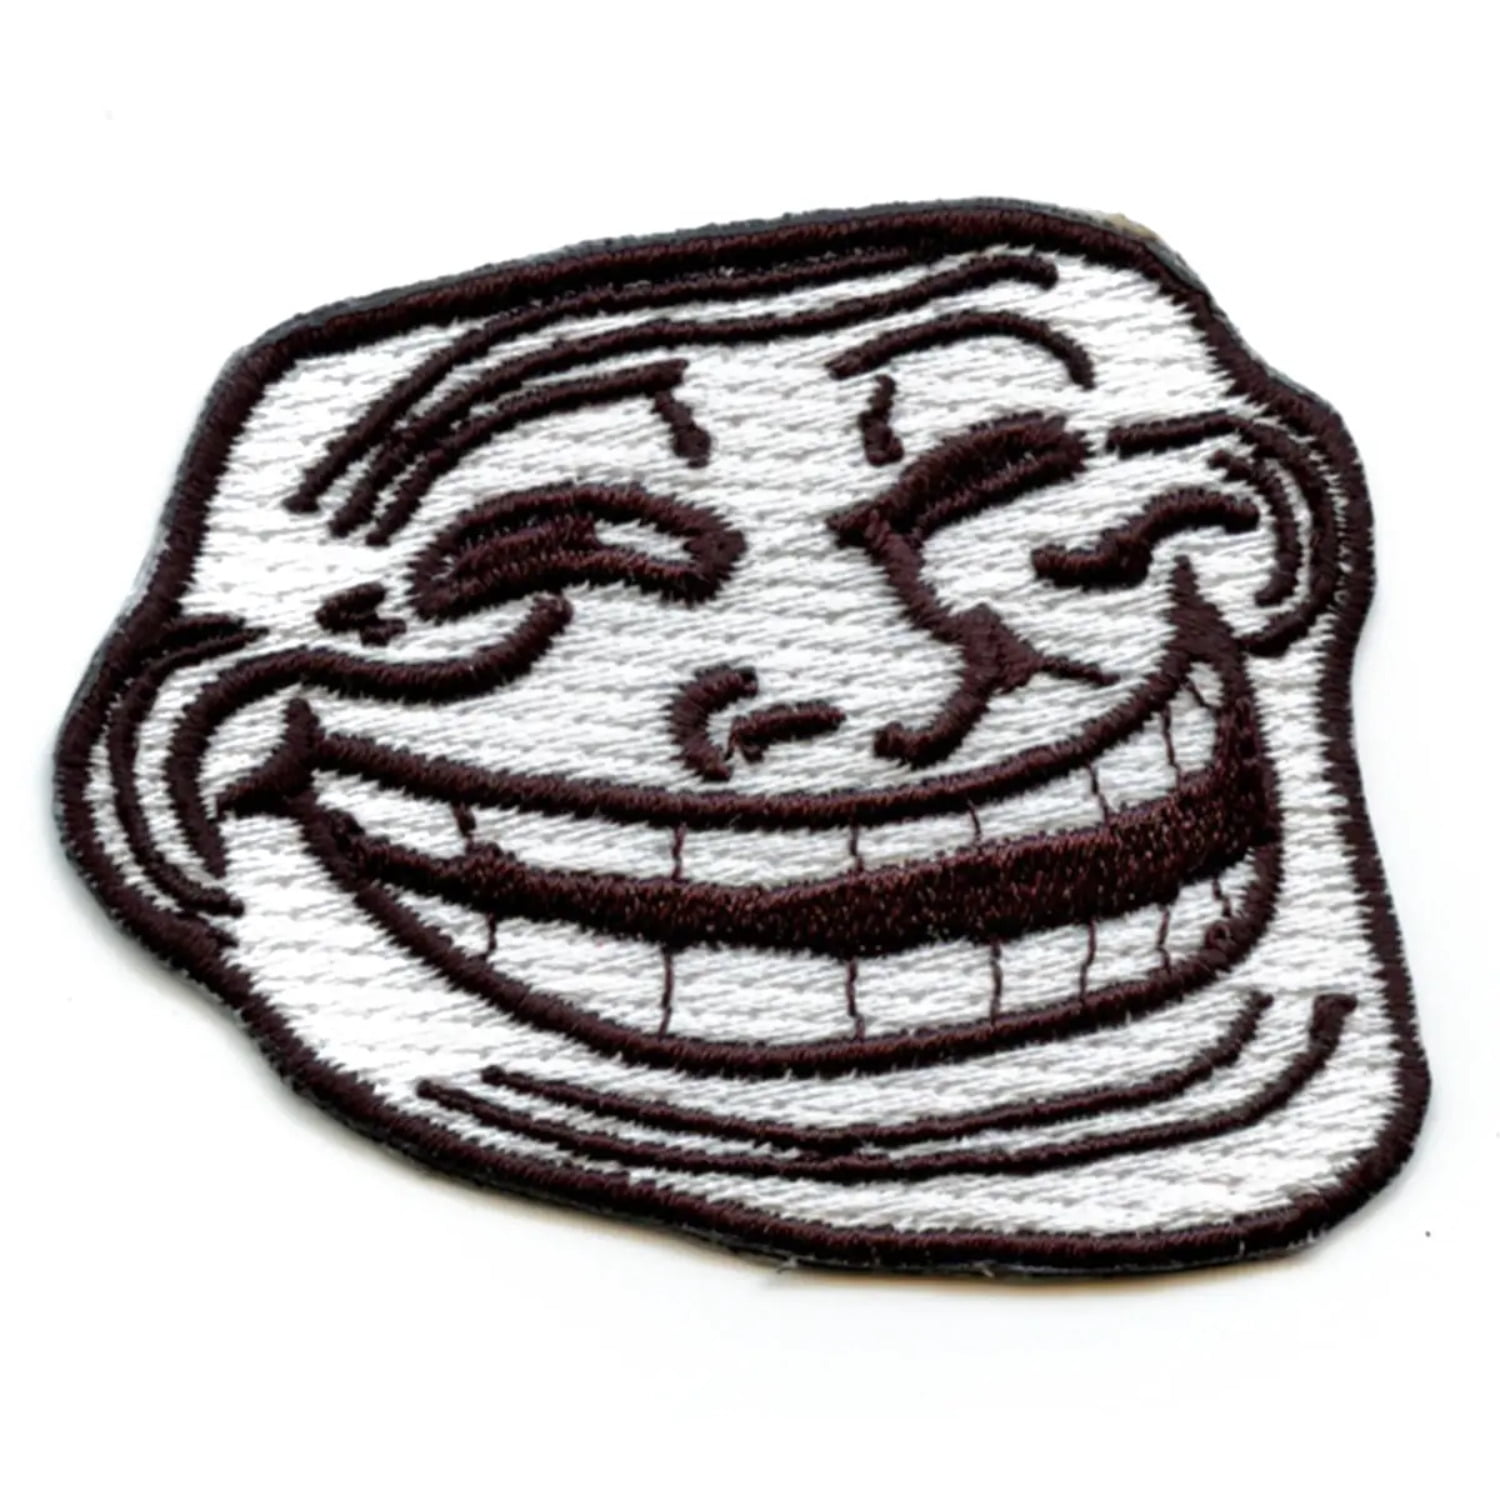 Troll Face Emoji Meme Iron On Embroidered Patch 